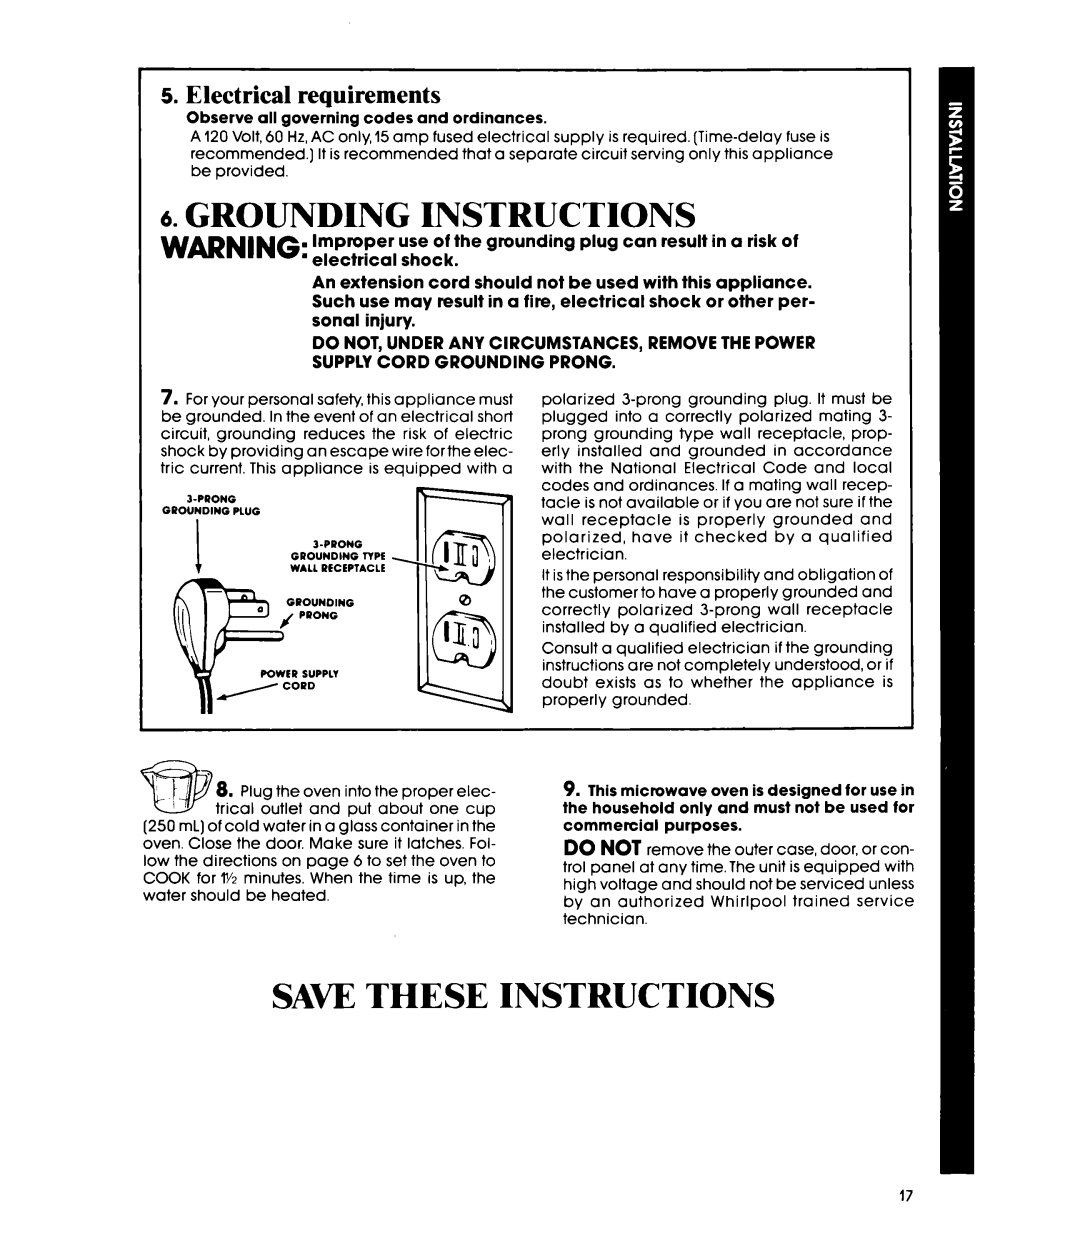 Whirlpool MW8500XP manual Grounding Instructions, Saw These Instructions, Electrical requirements 